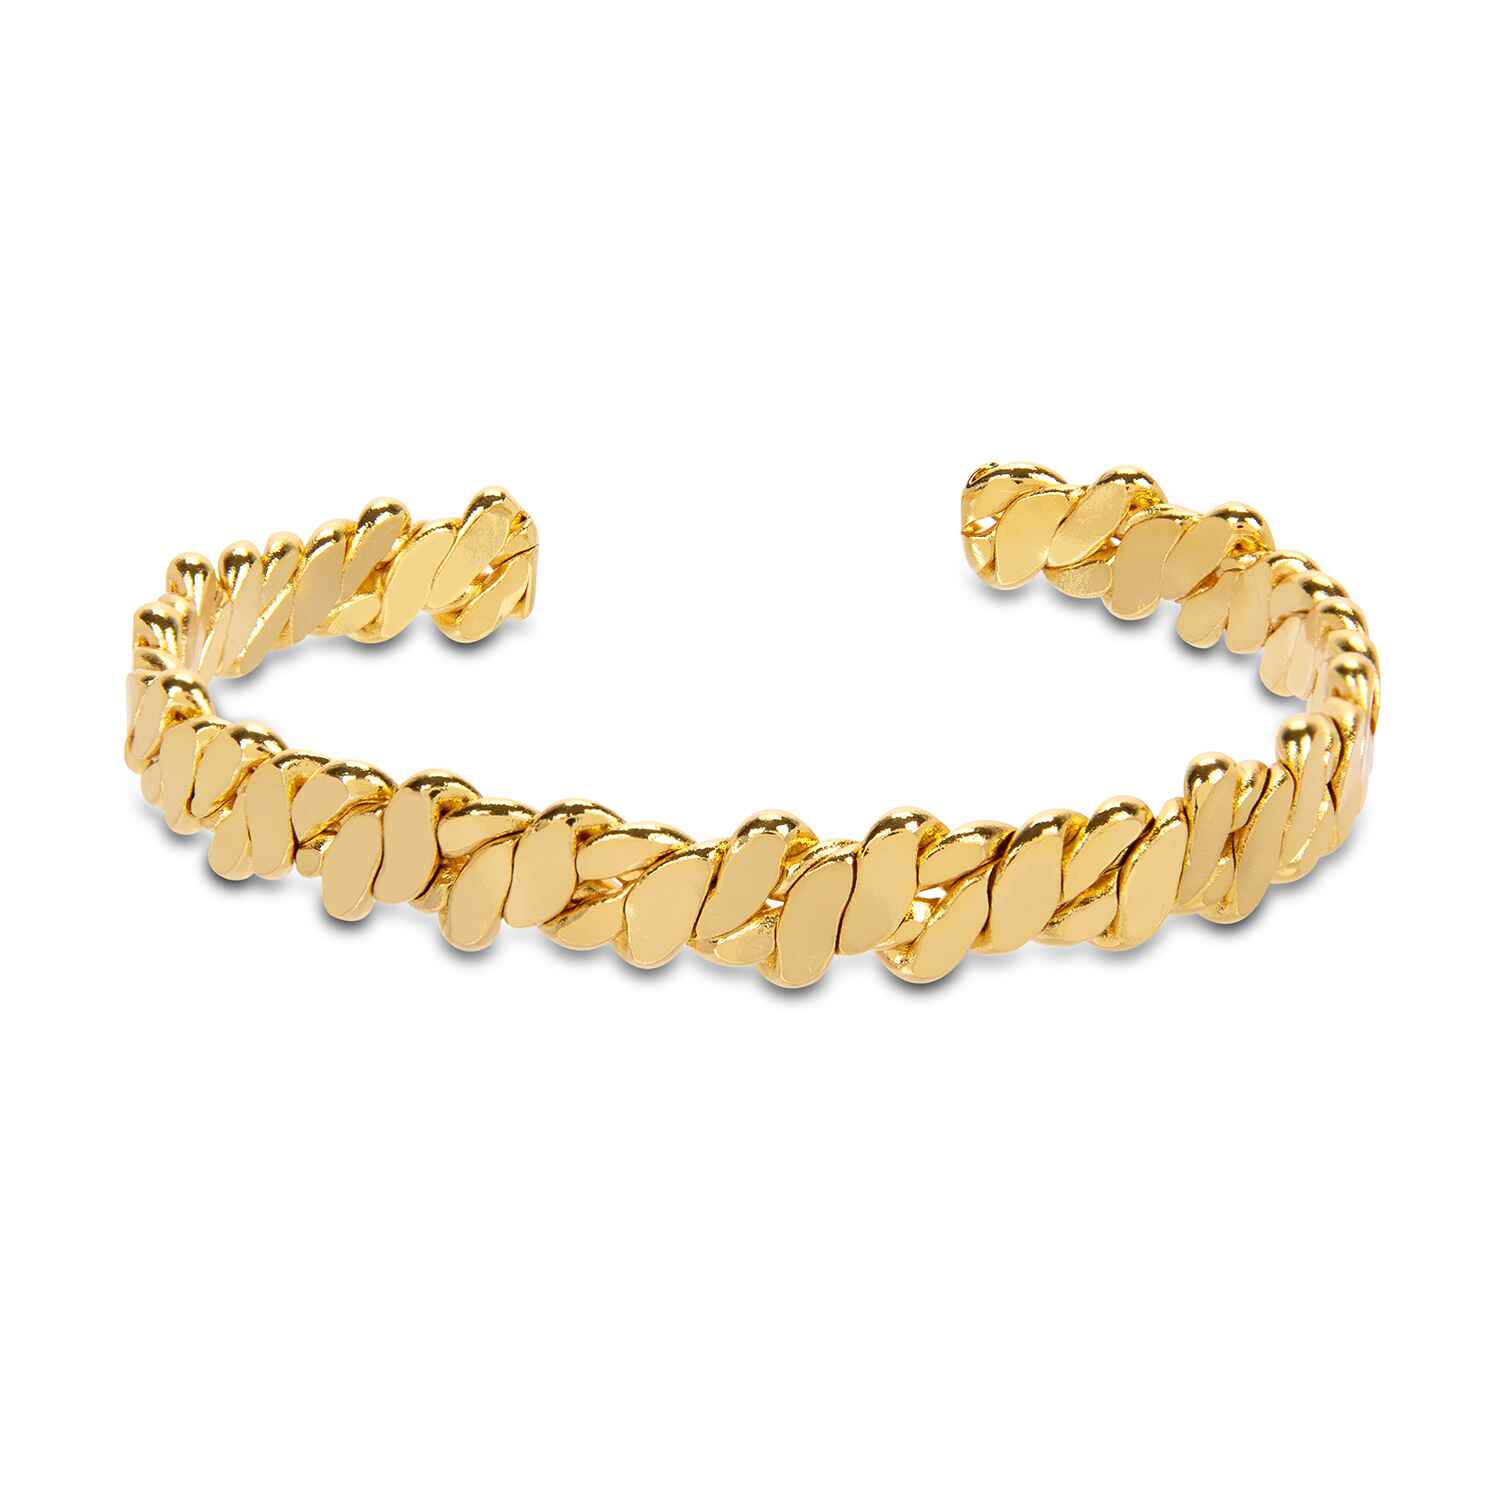 Delicately handmade to fit any wrist size, the Otto Pebble Gold Bangle is designed to reflect the texture of pebbled beach. This sustainable open cuff looks great worn alone or stacked.